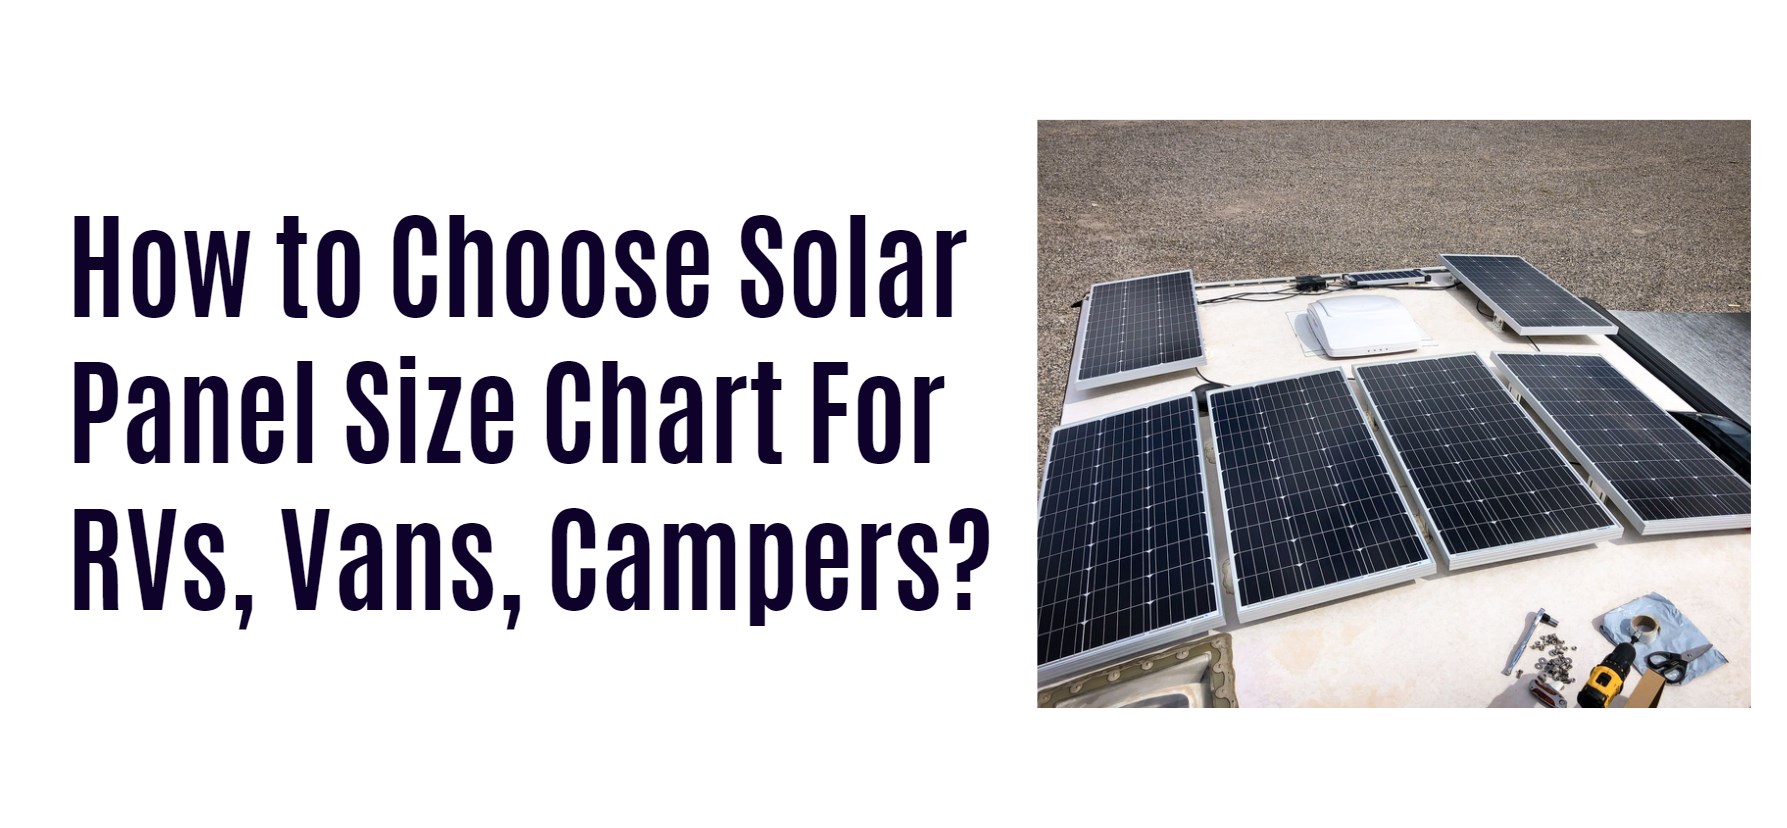 How to Choose Solar Panel Size Chart For RVs, Vans, Campers?